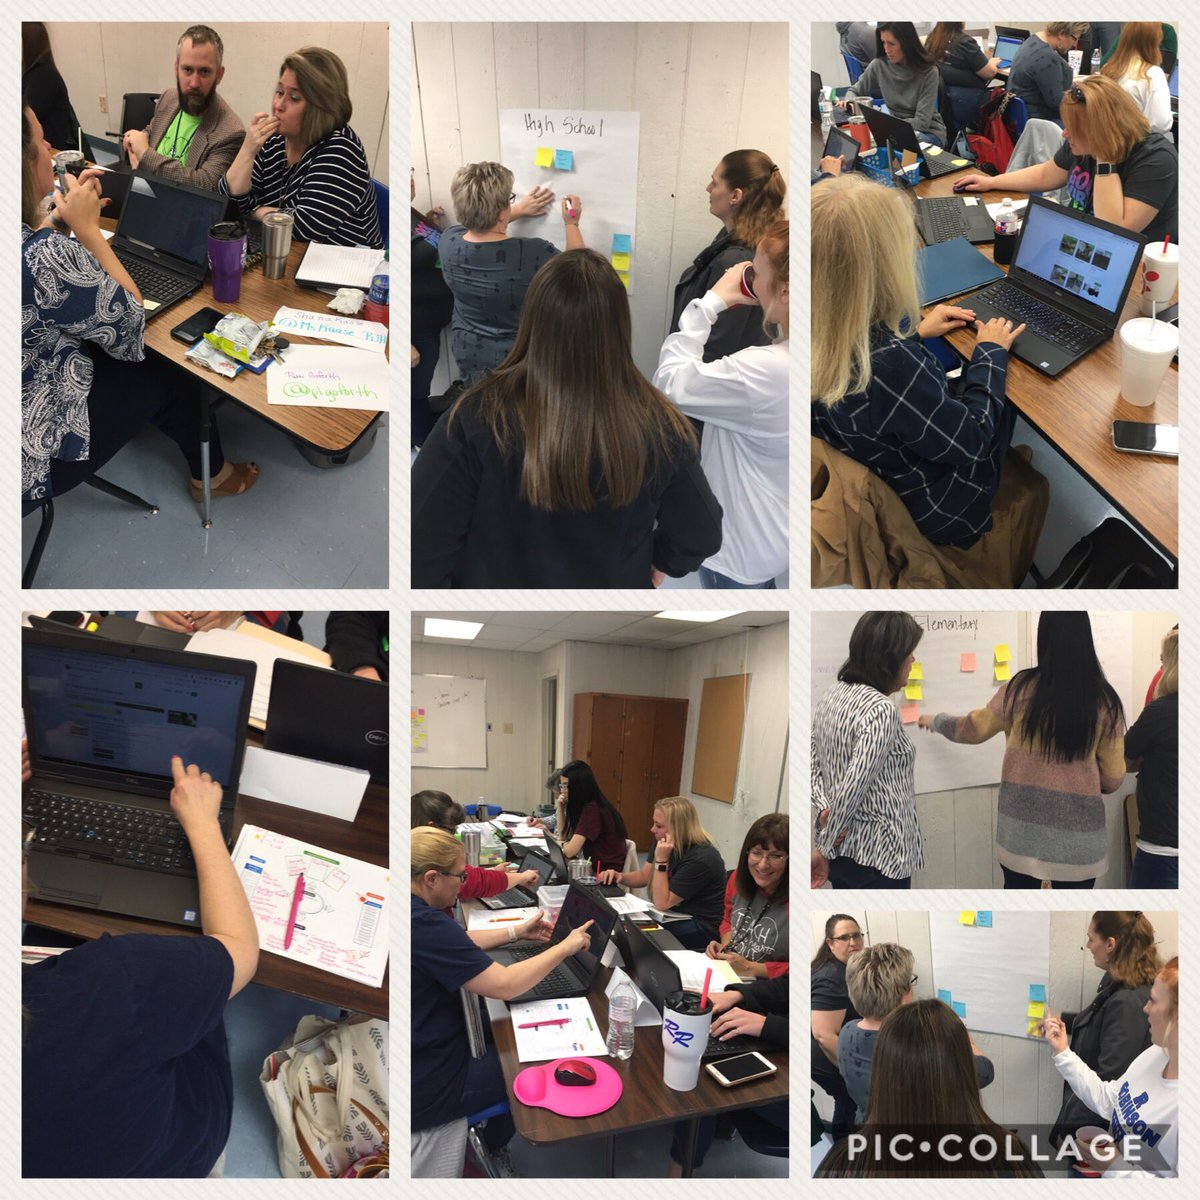 Way to go, K-12 Science! Great conversations as you planned together today! I want to be in your class ... you have amazing memorable moments planned for students!@robinsonisd #rocketsshinebright